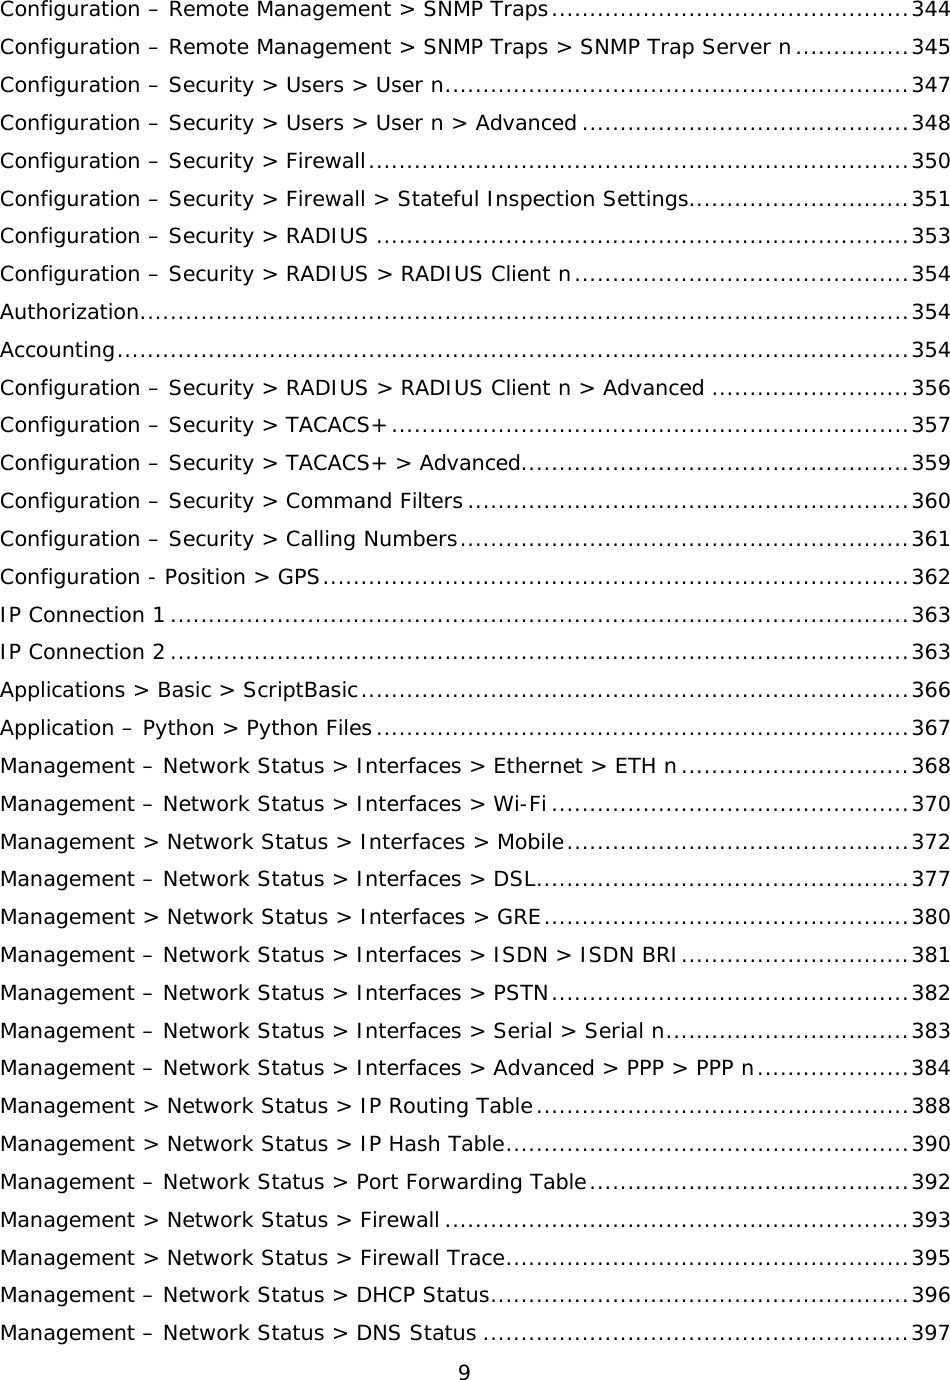 9  Configuration – Remote Management &gt; SNMP Traps ............................................... 344 Configuration – Remote Management &gt; SNMP Traps &gt; SNMP Trap Server n ............... 345 Configuration – Security &gt; Users &gt; User n ............................................................. 347 Configuration – Security &gt; Users &gt; User n &gt; Advanced ........................................... 348 Configuration – Security &gt; Firewall ....................................................................... 350 Configuration – Security &gt; Firewall &gt; Stateful Inspection Settings............................. 351 Configuration – Security &gt; RADIUS ...................................................................... 353 Configuration – Security &gt; RADIUS &gt; RADIUS Client n ............................................ 354 Authorization ..................................................................................................... 354 Accounting ........................................................................................................ 354 Configuration – Security &gt; RADIUS &gt; RADIUS Client n &gt; Advanced .......................... 356 Configuration – Security &gt; TACACS+ .................................................................... 357 Configuration – Security &gt; TACACS+ &gt; Advanced................................................... 359 Configuration – Security &gt; Command Filters .......................................................... 360 Configuration – Security &gt; Calling Numbers ........................................................... 361 Configuration - Position &gt; GPS ............................................................................. 362 IP Connection 1 ................................................................................................. 363 IP Connection 2 ................................................................................................. 363 Applications &gt; Basic &gt; ScriptBasic ........................................................................ 366 Application – Python &gt; Python Files ...................................................................... 367 Management – Network Status &gt; Interfaces &gt; Ethernet &gt; ETH n .............................. 368 Management – Network Status &gt; Interfaces &gt; Wi-Fi ............................................... 370 Management &gt; Network Status &gt; Interfaces &gt; Mobile ............................................. 372 Management – Network Status &gt; Interfaces &gt; DSL ................................................. 377 Management &gt; Network Status &gt; Interfaces &gt; GRE ................................................ 380 Management – Network Status &gt; Interfaces &gt; ISDN &gt; ISDN BRI .............................. 381 Management – Network Status &gt; Interfaces &gt; PSTN ............................................... 382 Management – Network Status &gt; Interfaces &gt; Serial &gt; Serial n ................................ 383 Management – Network Status &gt; Interfaces &gt; Advanced &gt; PPP &gt; PPP n .................... 384 Management &gt; Network Status &gt; IP Routing Table ................................................. 388 Management &gt; Network Status &gt; IP Hash Table ..................................................... 390 Management – Network Status &gt; Port Forwarding Table .......................................... 392 Management &gt; Network Status &gt; Firewall ............................................................. 393 Management &gt; Network Status &gt; Firewall Trace ..................................................... 395 Management – Network Status &gt; DHCP Status ....................................................... 396 Management – Network Status &gt; DNS Status ........................................................ 397 